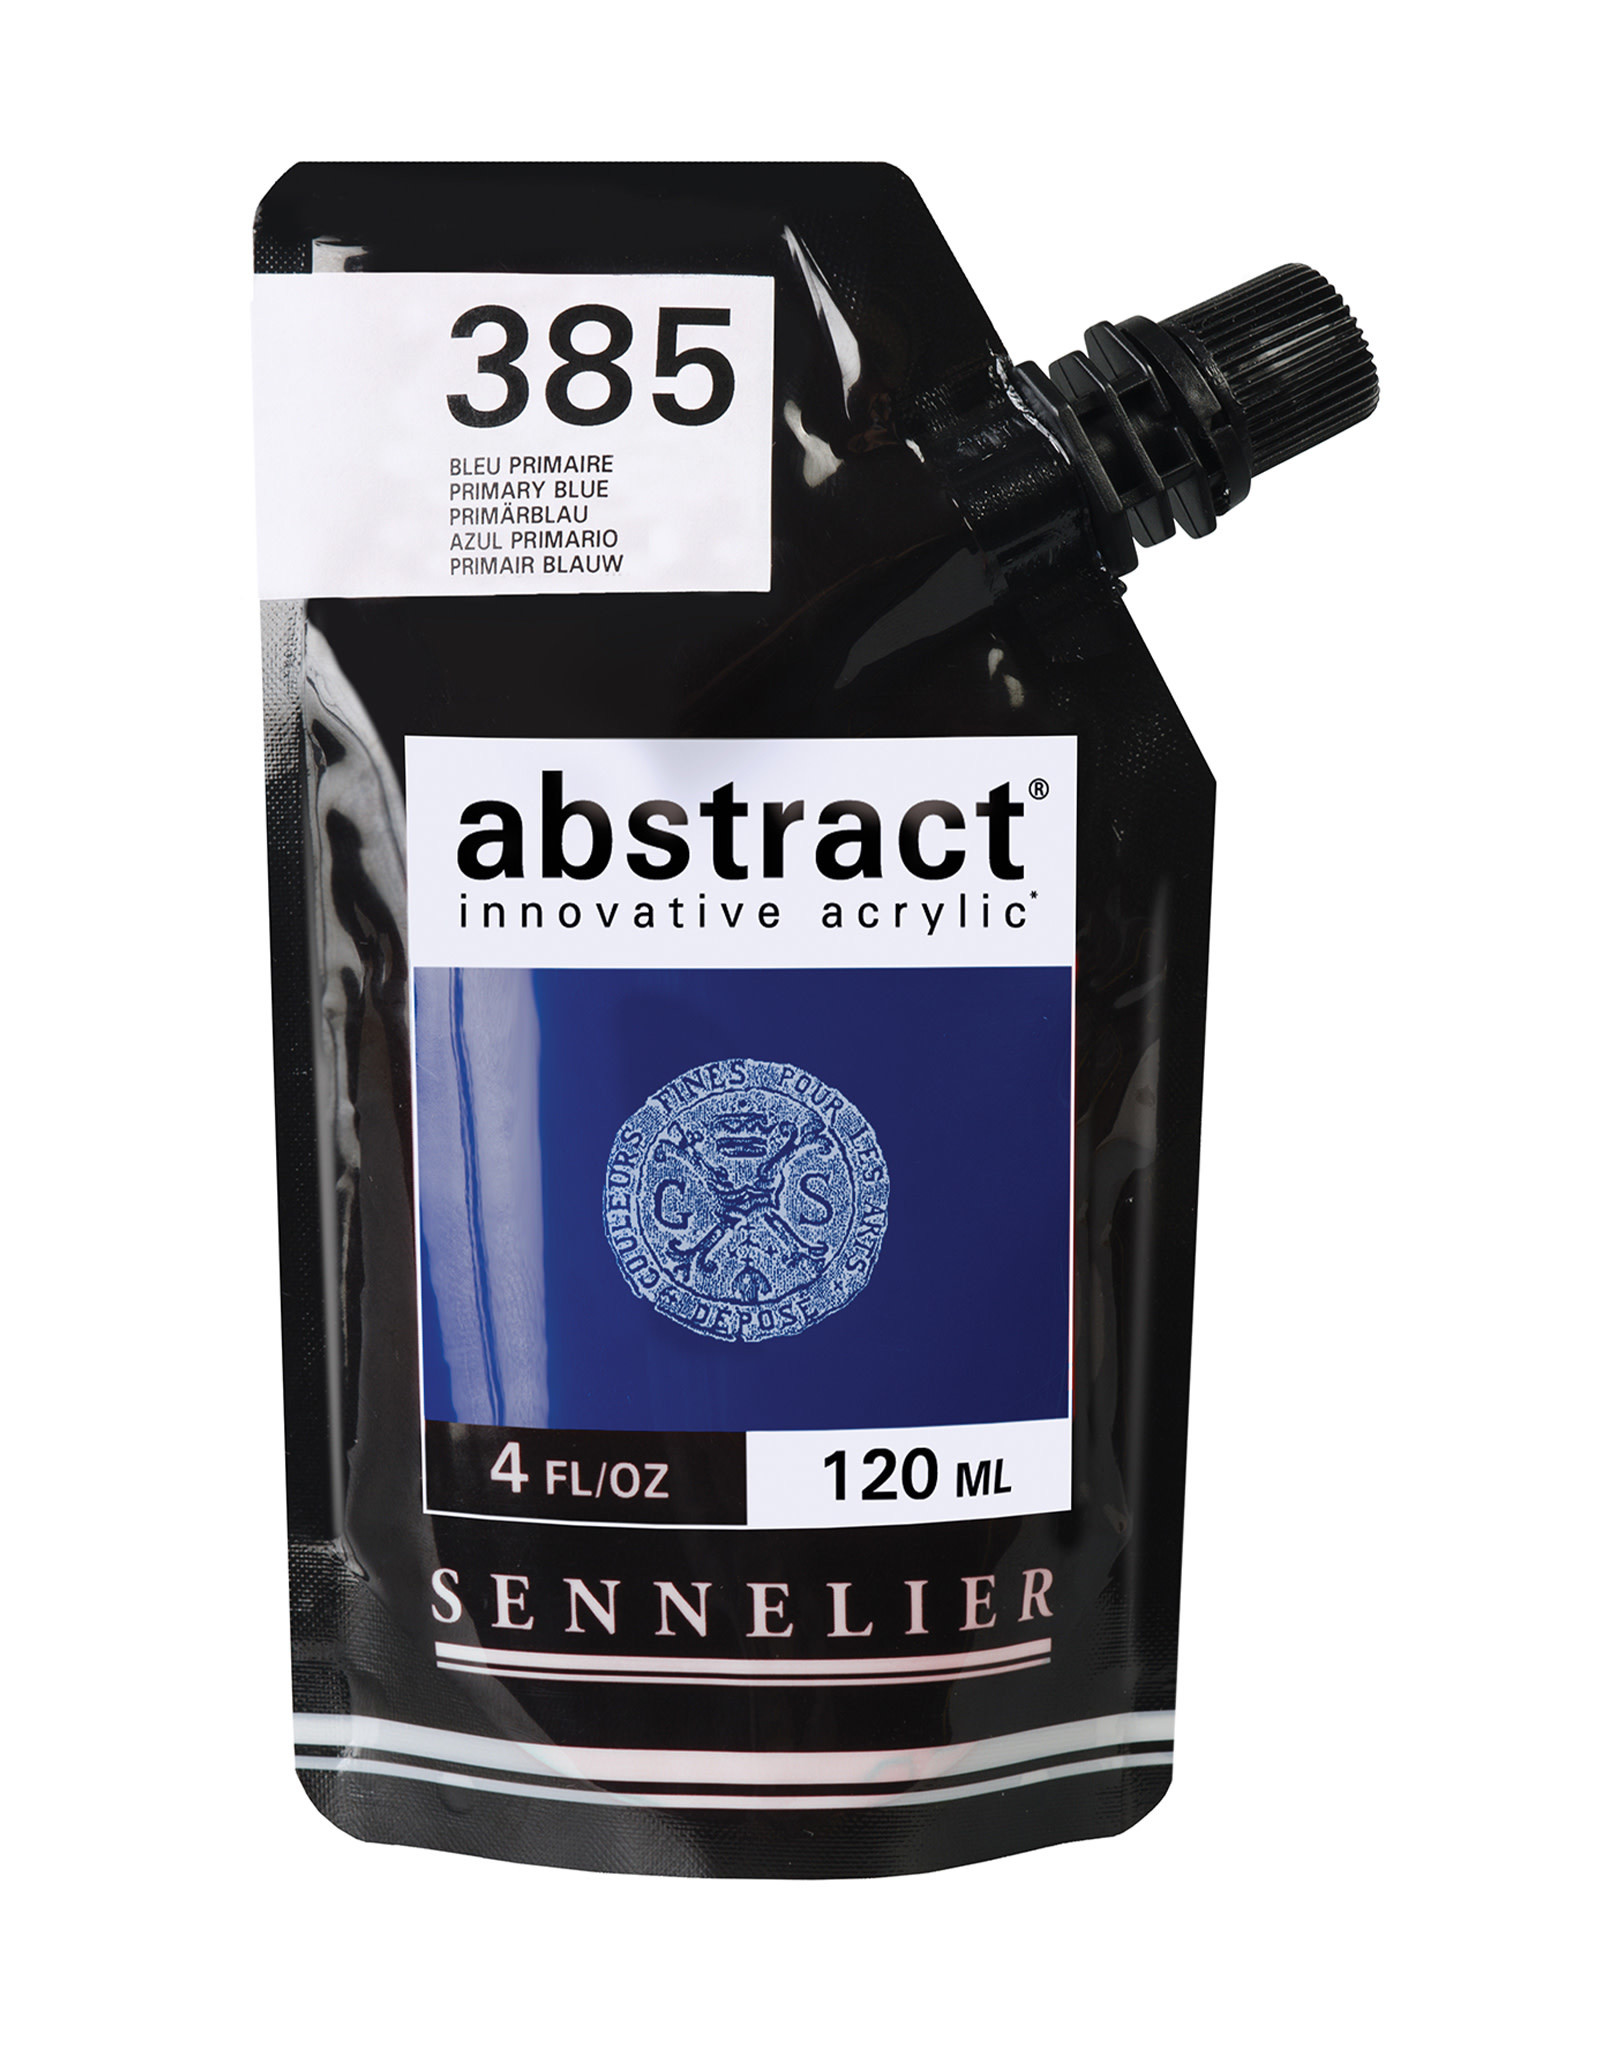 Sennelier Sennelier Abstract Acrylic, Primary Blue 120ml